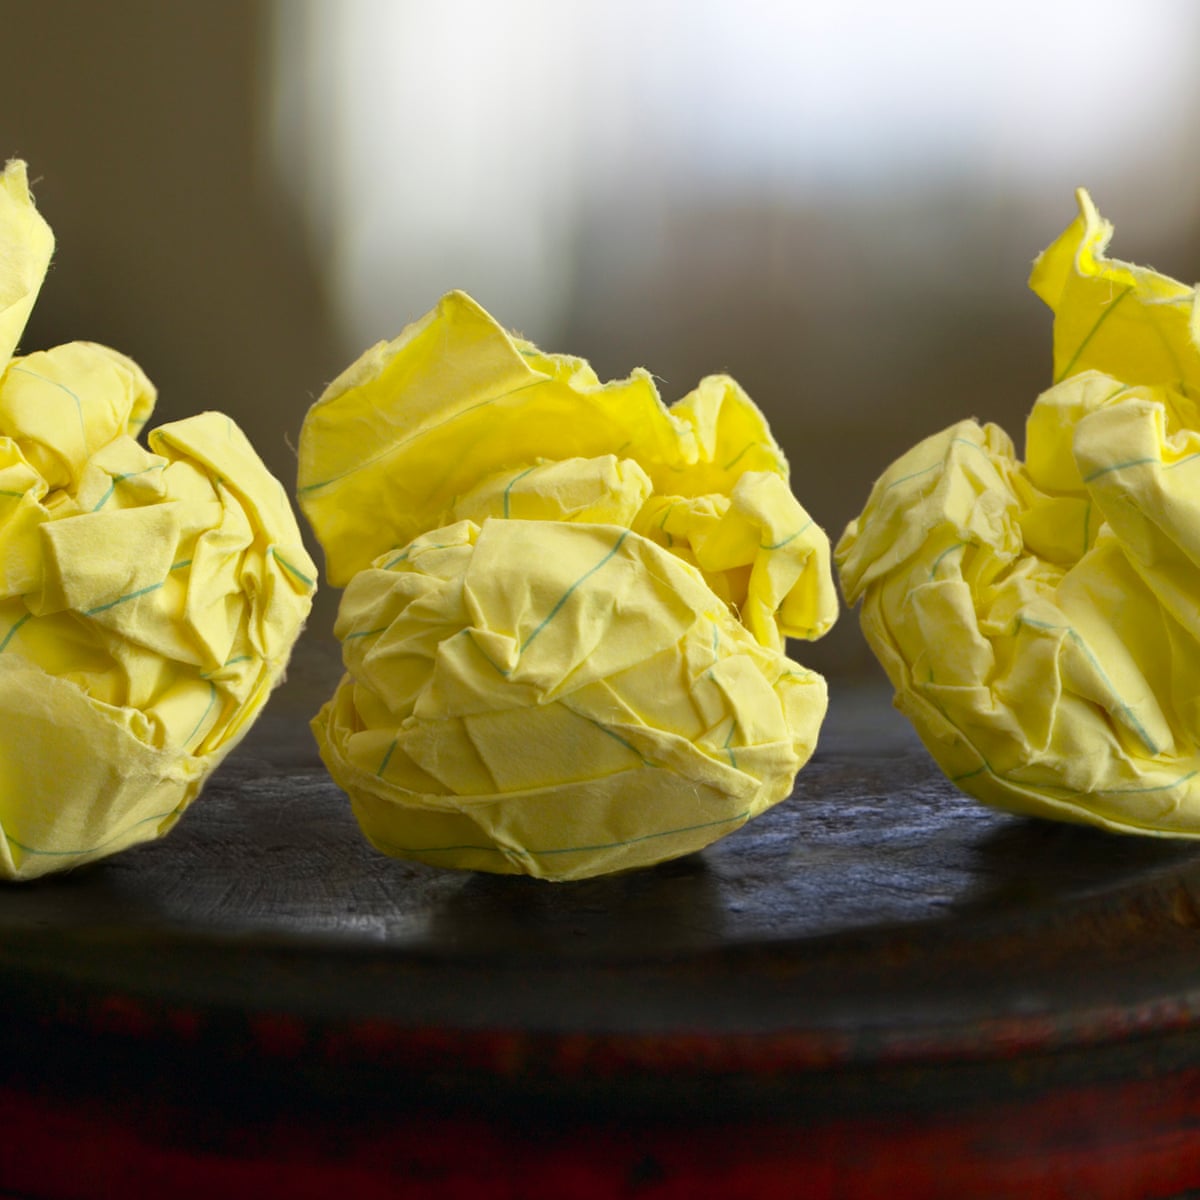 Make Tissue Paper Flowers  Alzheimer's Activities and More!